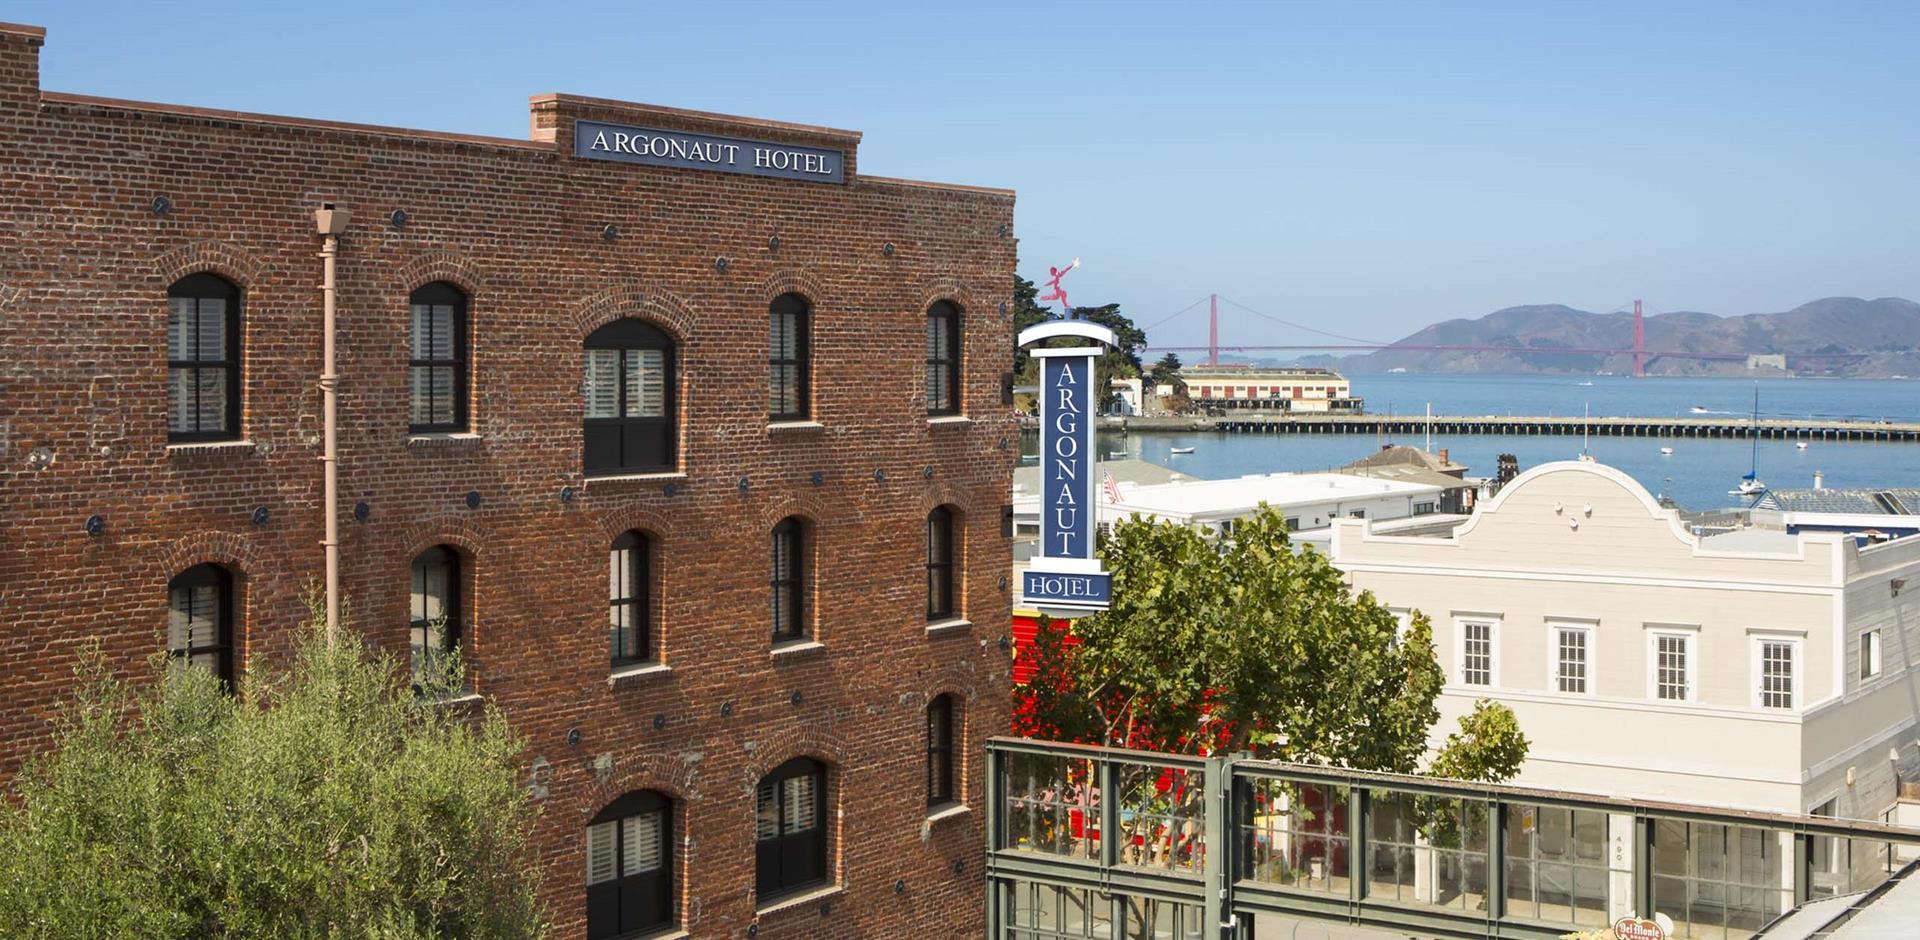 Argonaut Hotel and view of bay area, San Francisco, USA